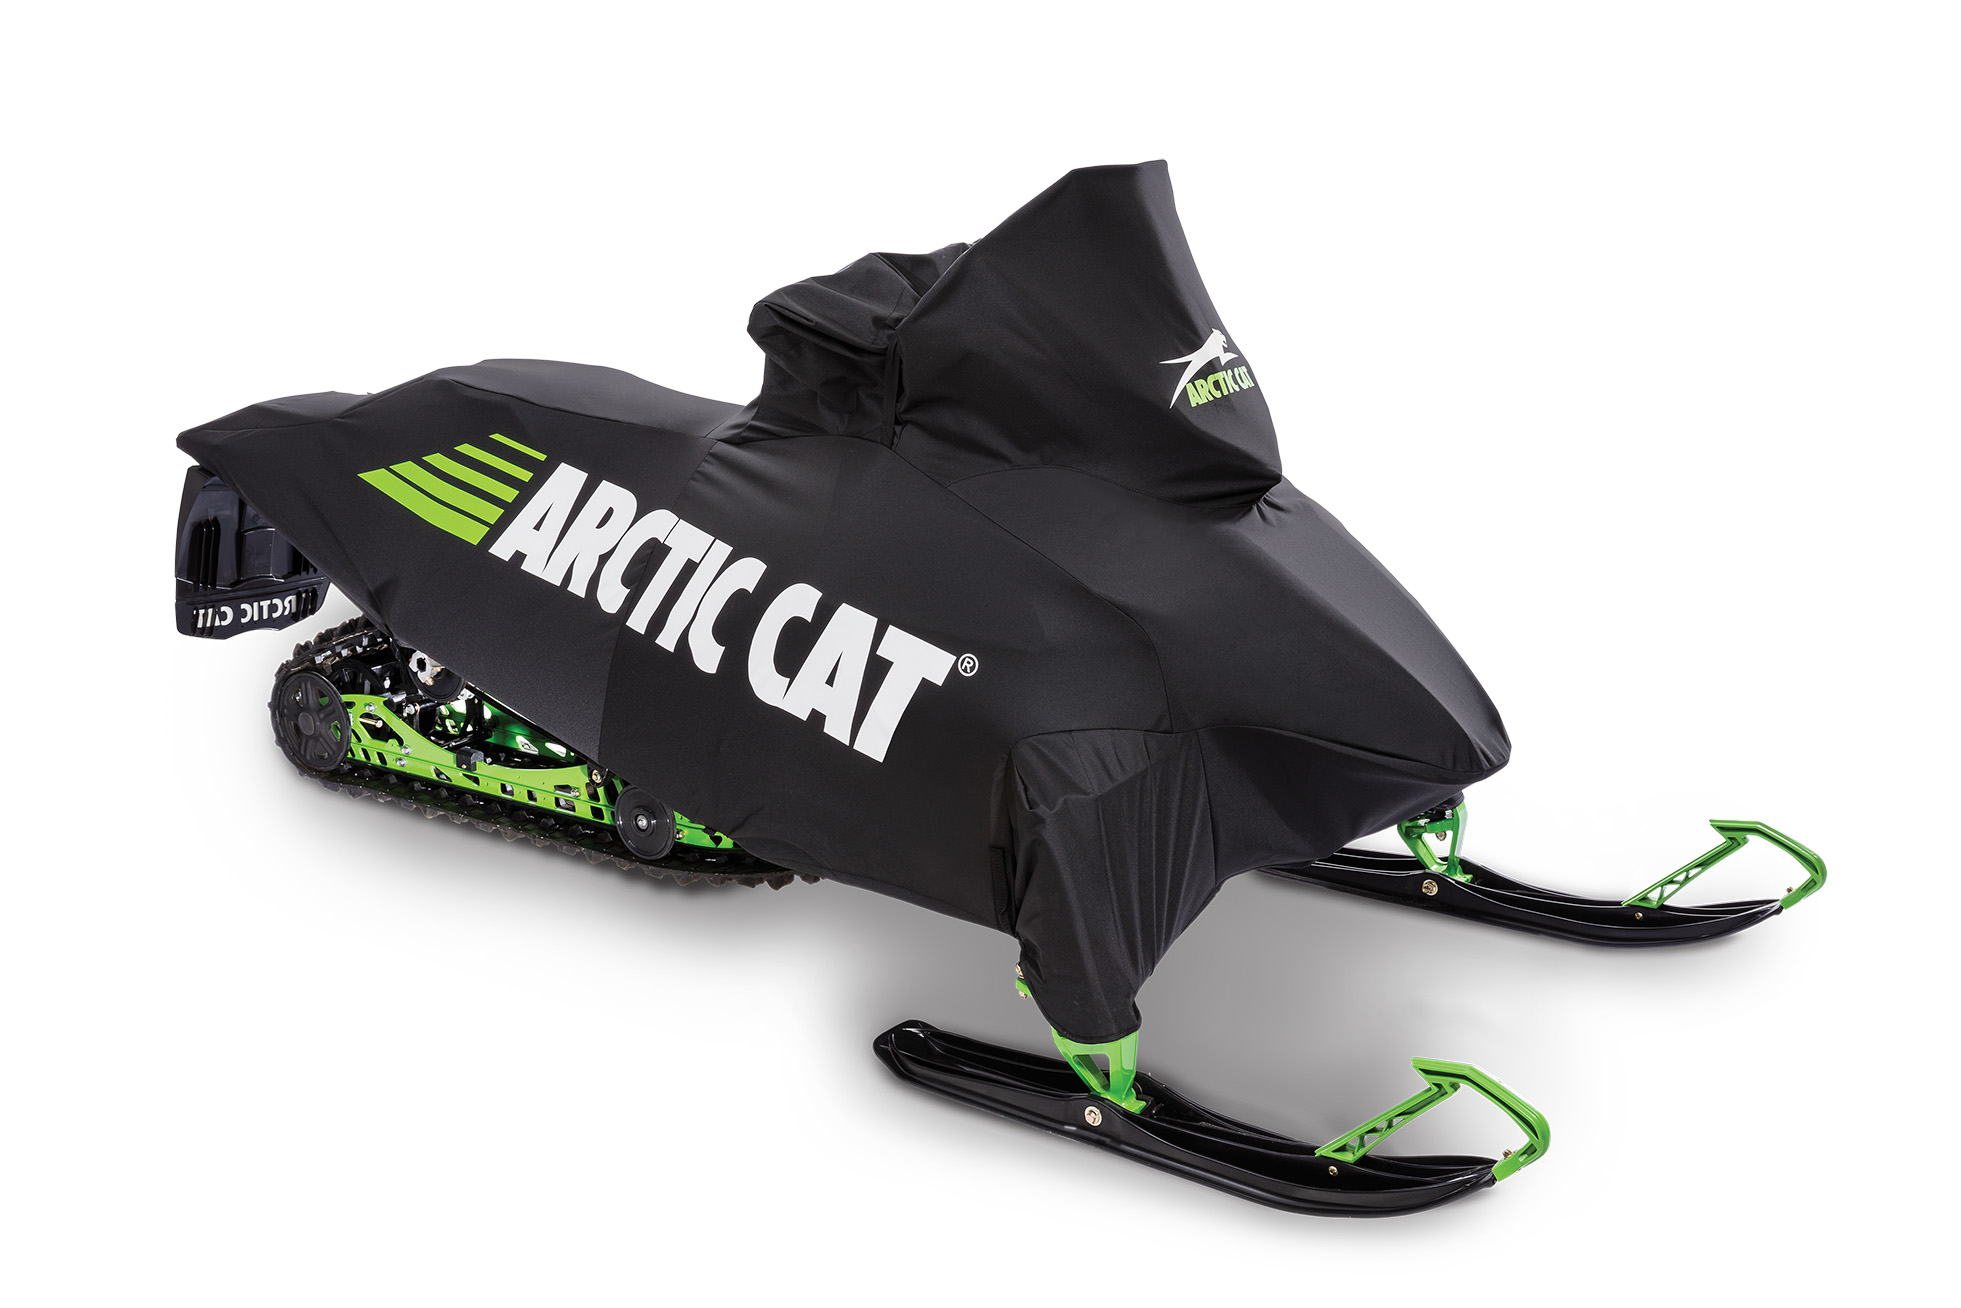 Super Quality Full Fit Snowmobile Sled Cover fits Arctic Cat M8 153 2007 2008 2009 2010 2011